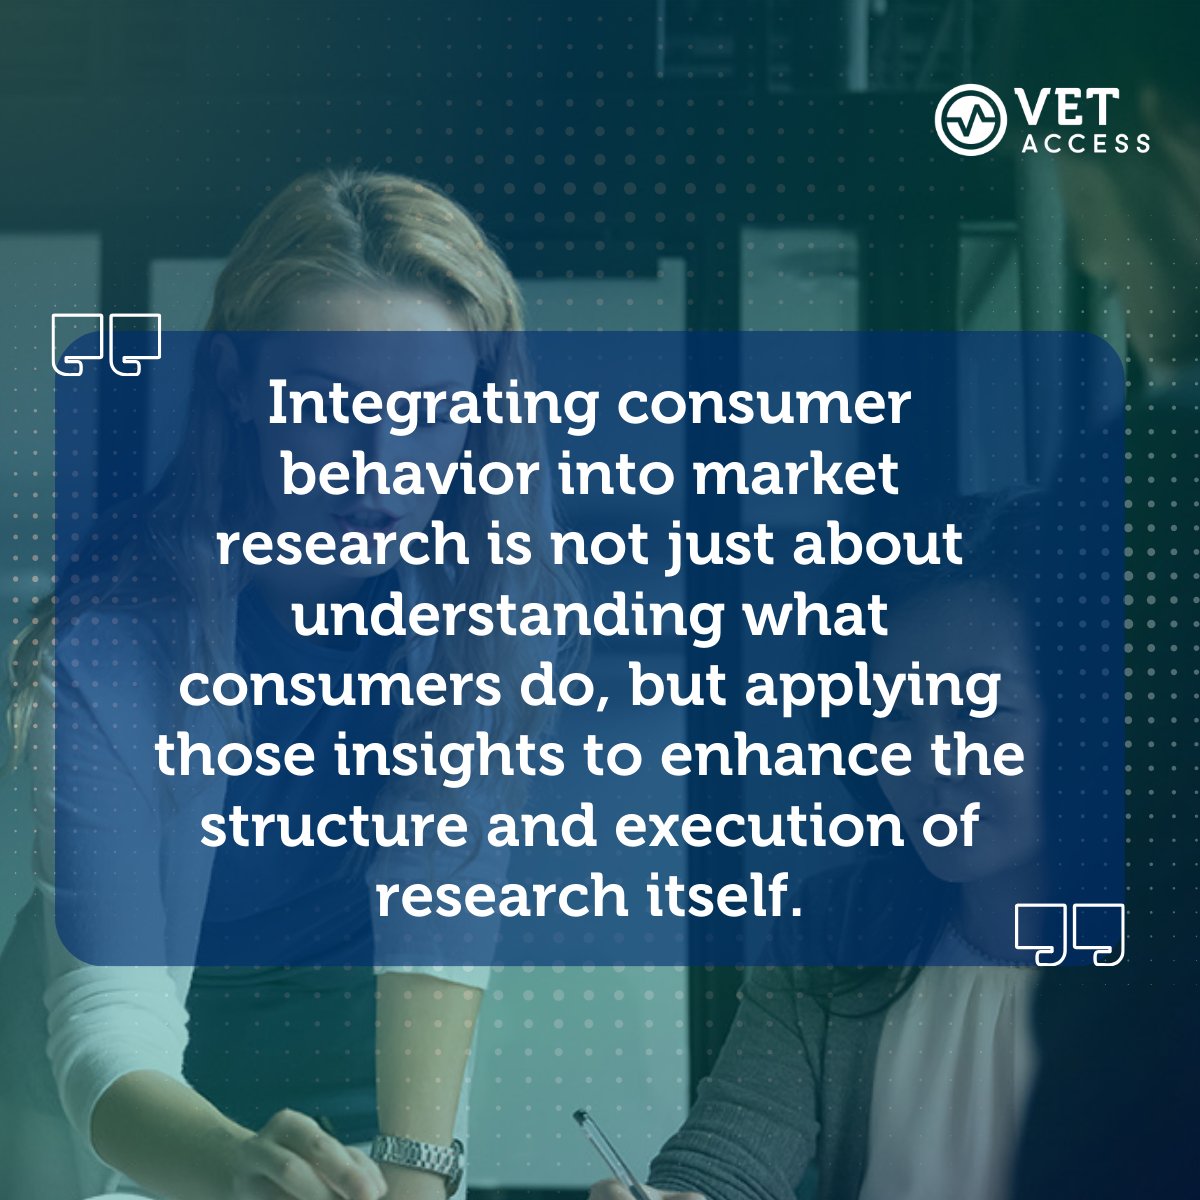 Explore the critical role of consumer behavior in refining market research processes and enhancing data quality and effectiveness. Full blog here: hubs.la/Q02wvcwP0

#vetaccess #consumerinsights #marketresearch